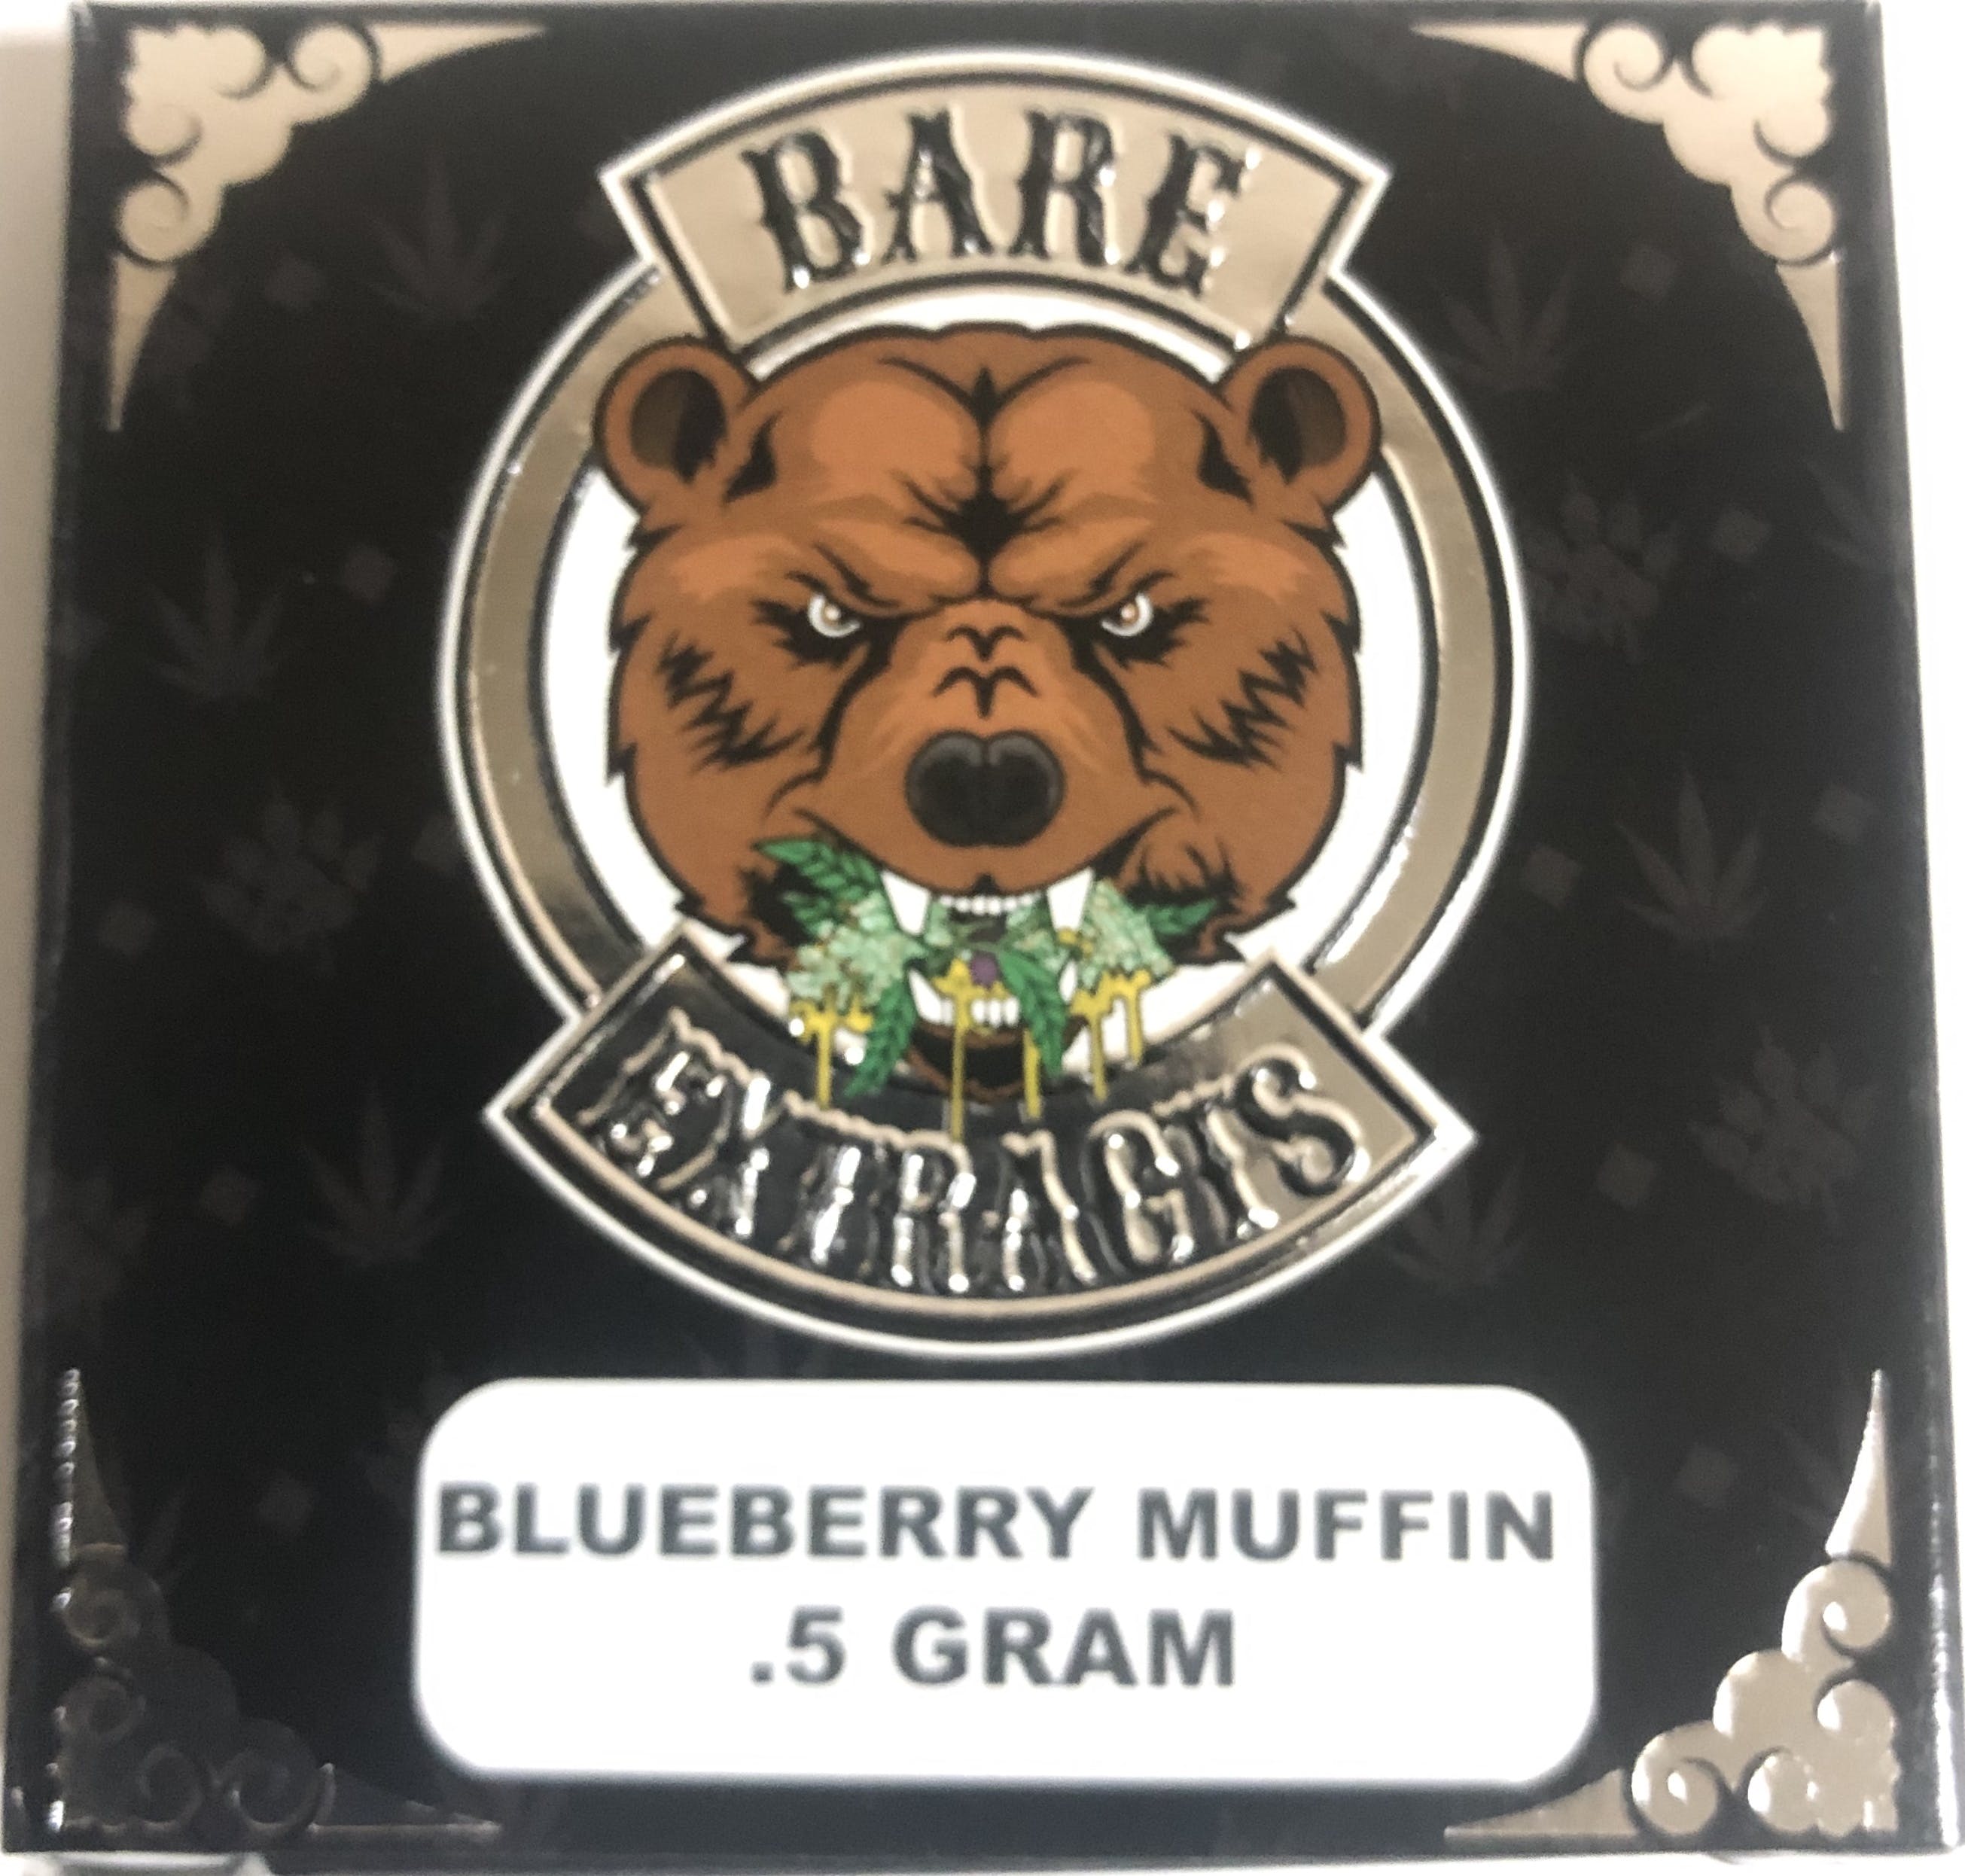 marijuana-dispensaries-2781-w-ramsey-st-suite-7-banning-bare-extracts-blueberry-muffin-live-resin